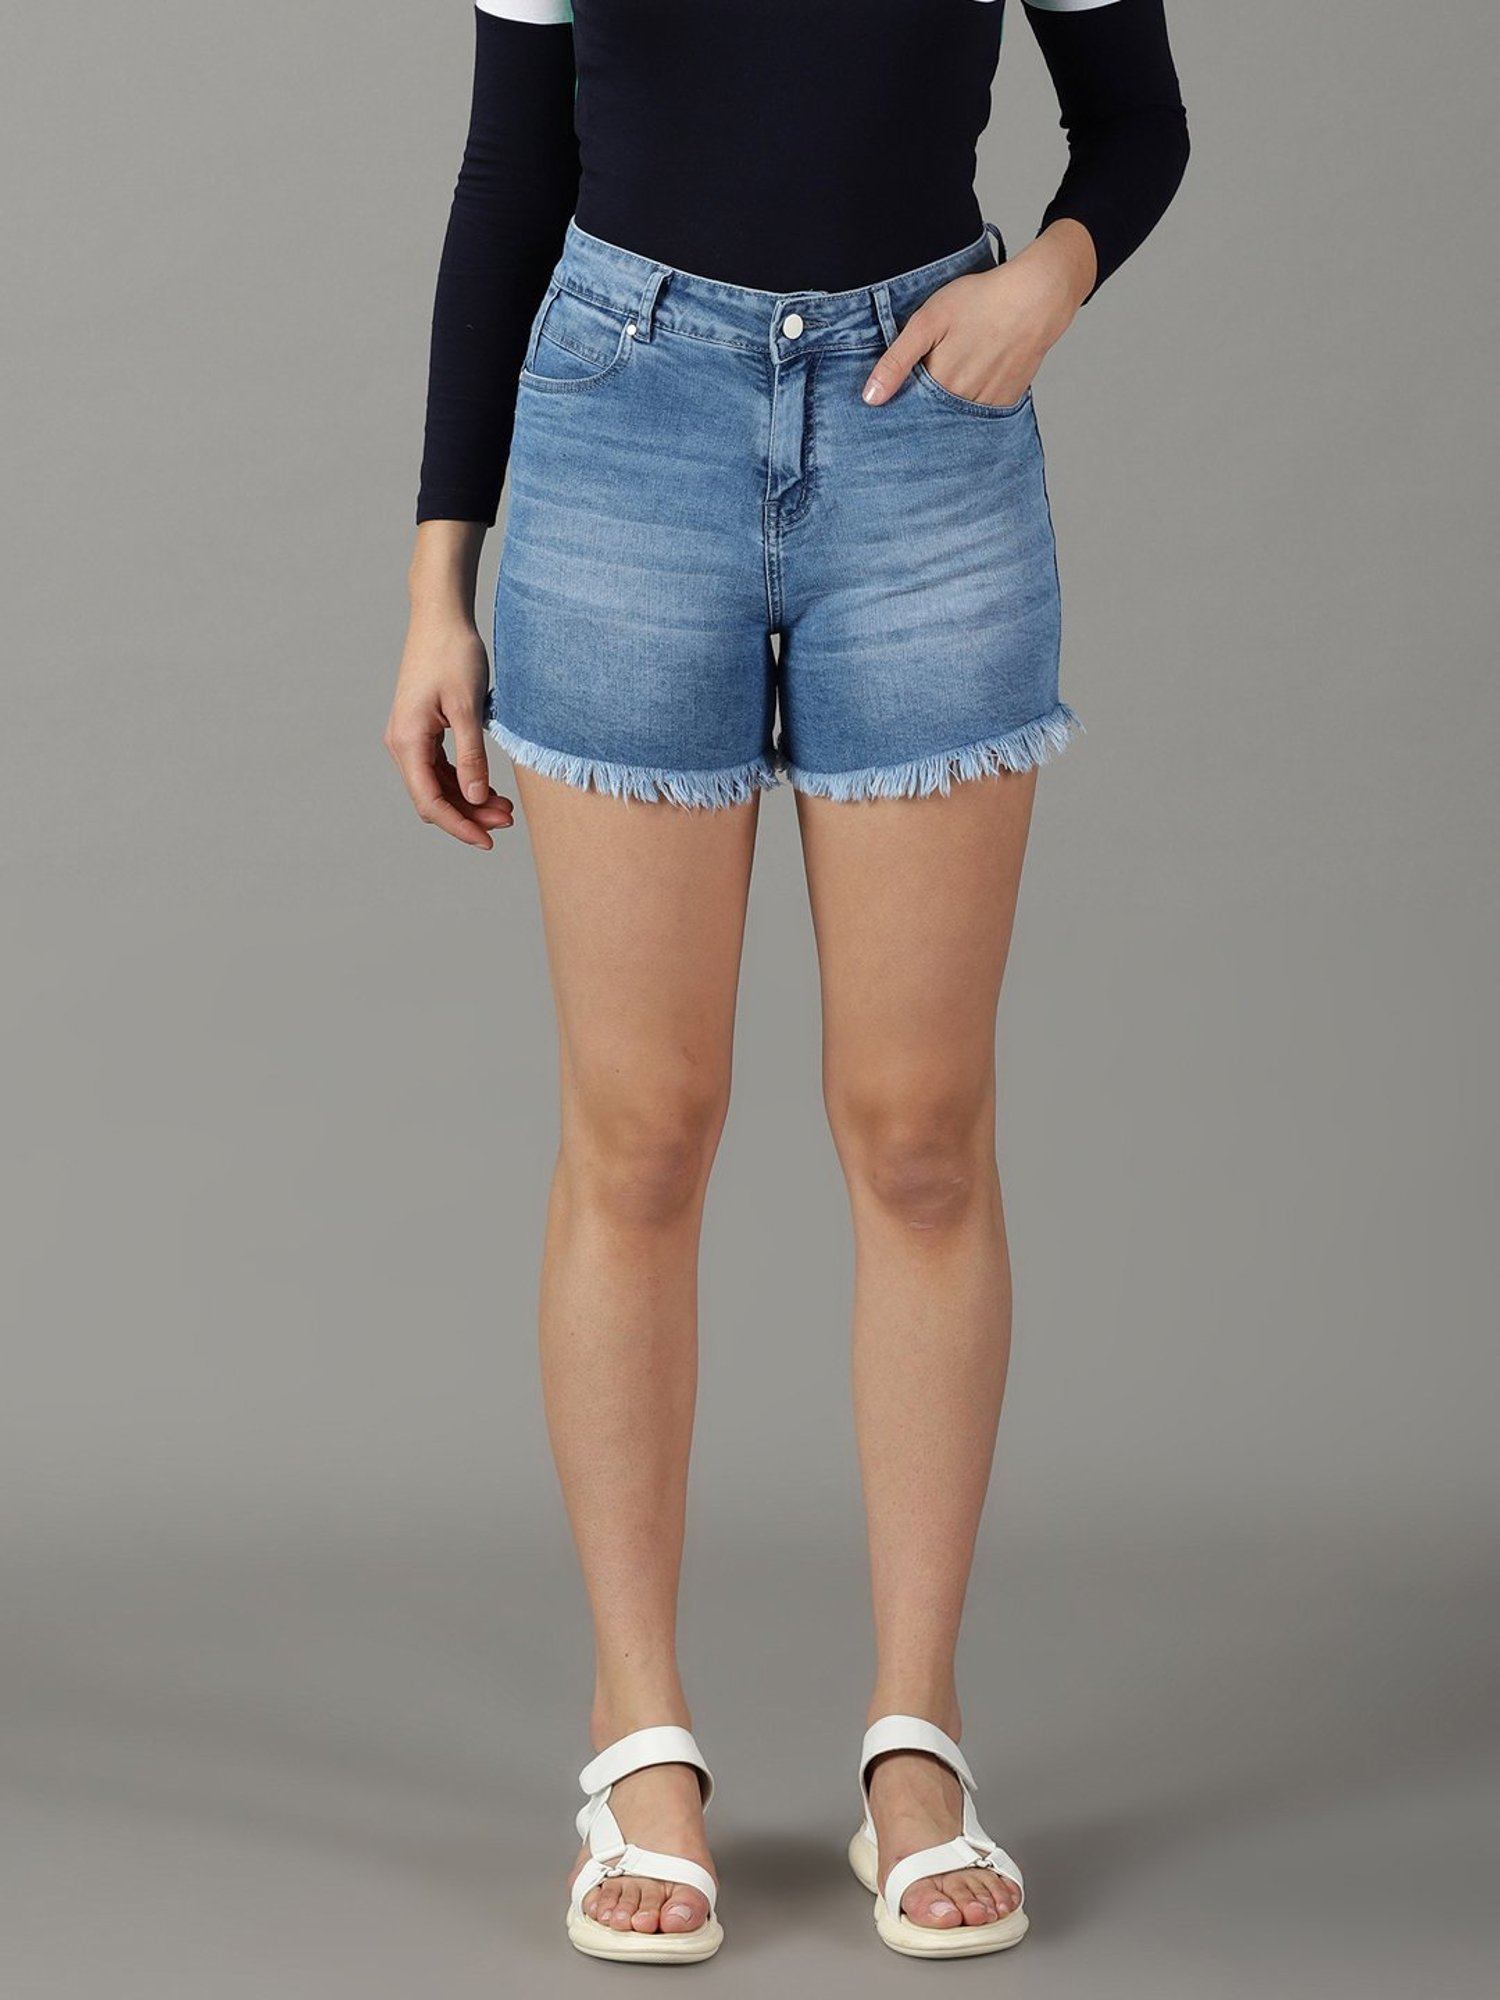 Buy PEPE Denim Loose Fit Cotton Women's Casual Shorts | Shoppers Stop